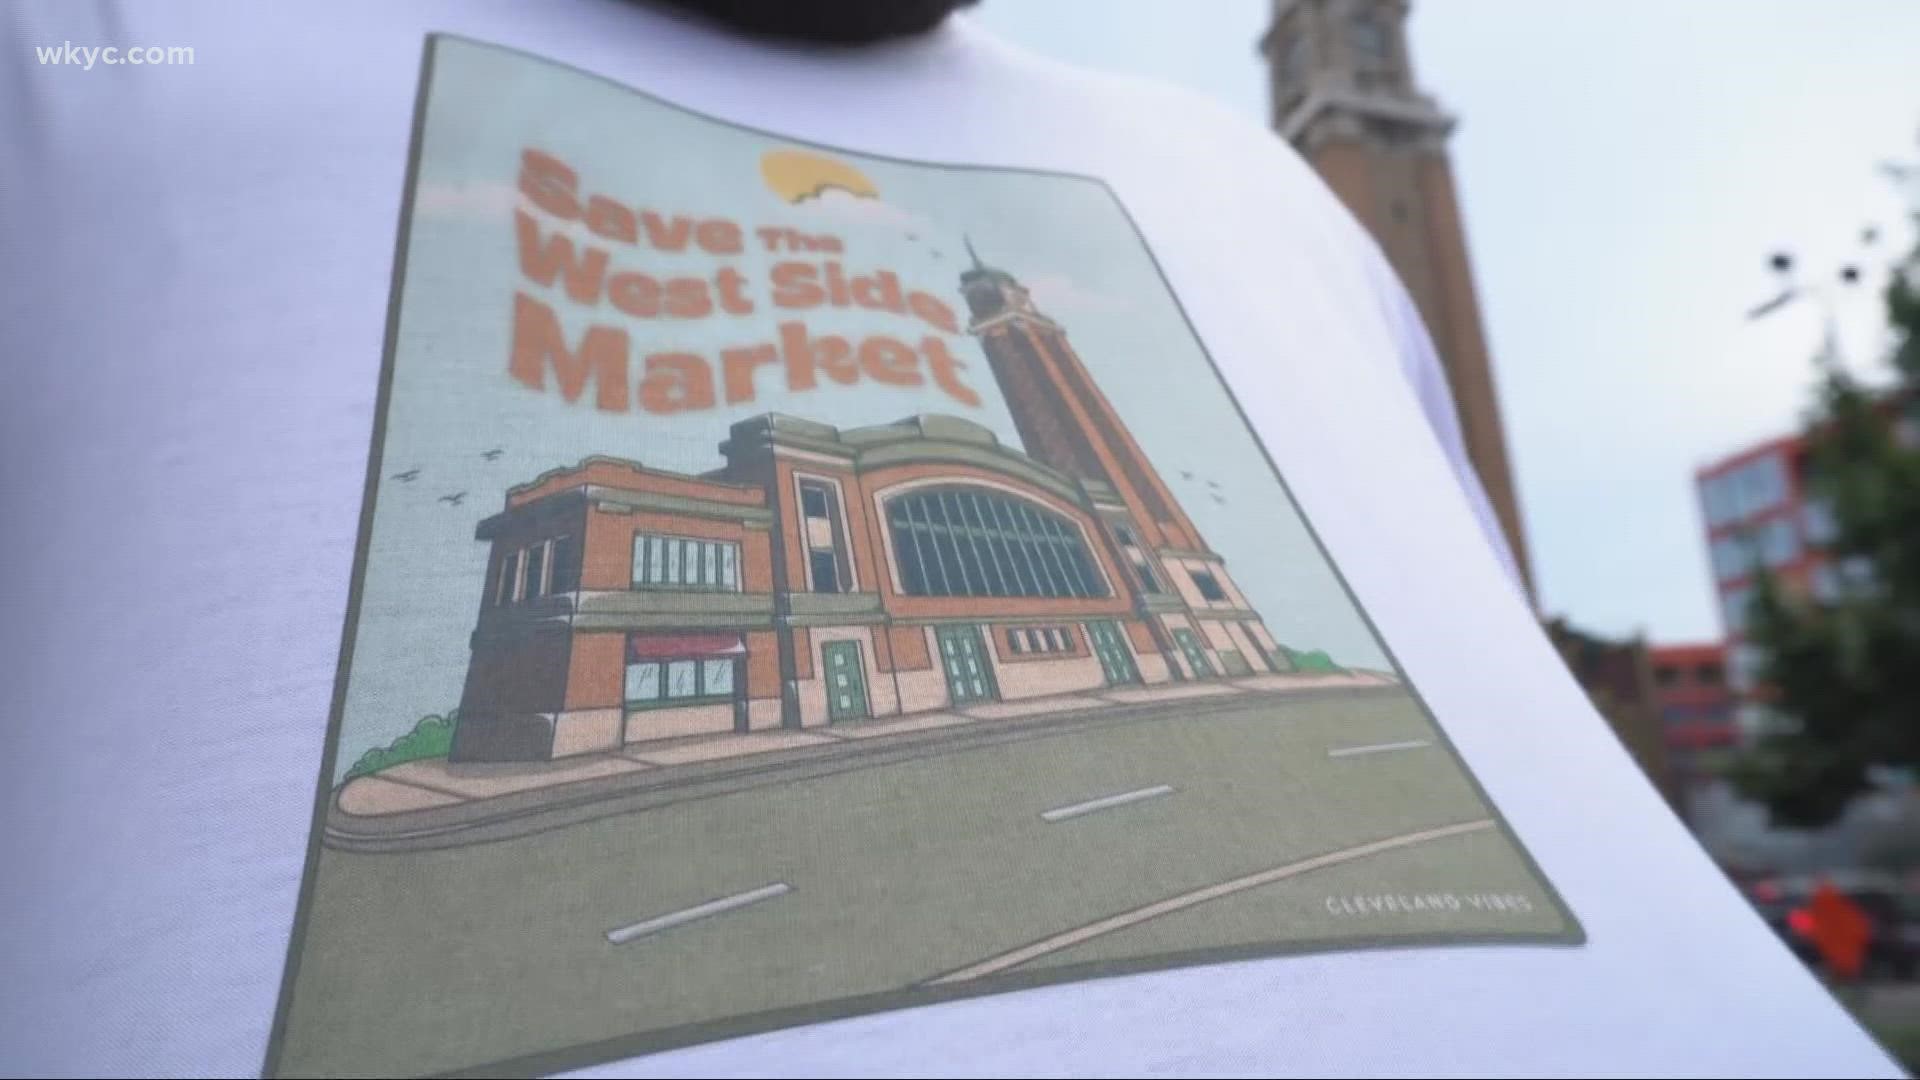 With ongoing issues at the iconic West Side Market, the Cleveland Vibes company is now selling T-shirts to raise money for the legendary location.